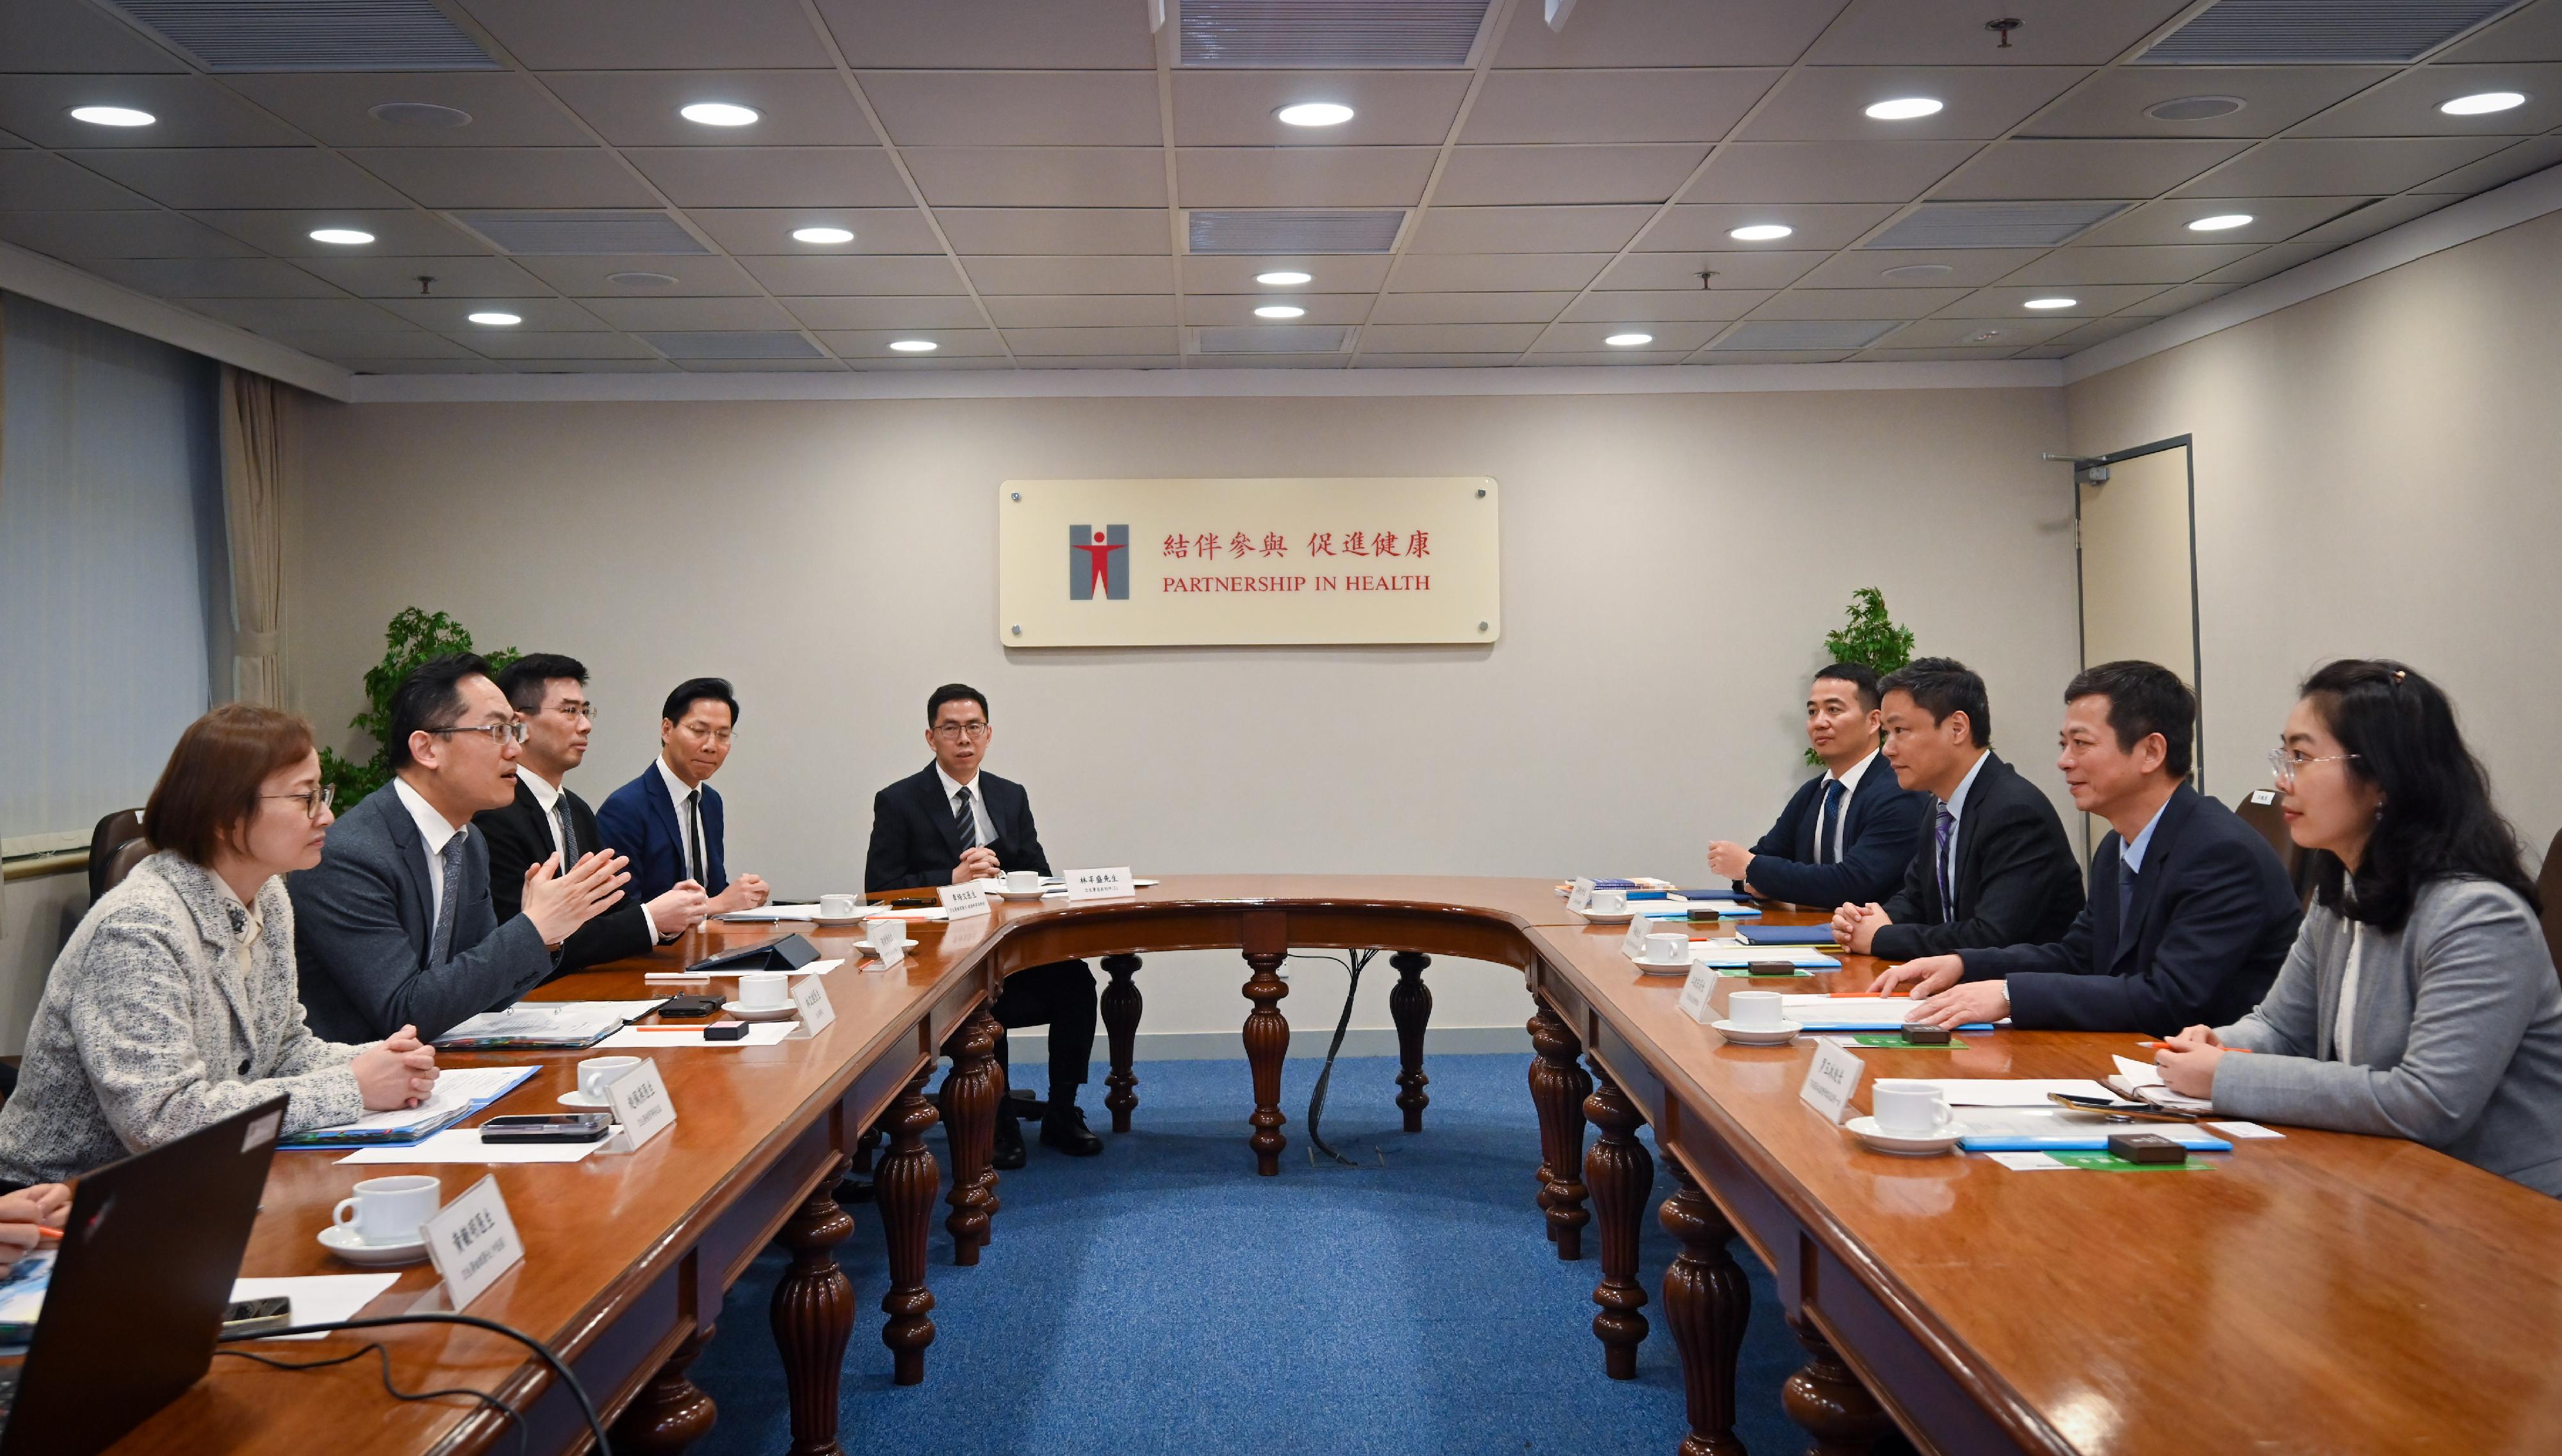 The Director of Health, Dr Ronald Lam (second left), today (March 27) met with a delegation led by the General Director of the Guangdong Provincial Medical Products Administration, Mr Jiang Xiaodong (second right). At the meeting, there was in-depth discussion on collaboration in areas of Chinese medicine development, and the measure of using Hong Kong registered drugs and medical devices used in Hong Kong public hospitals in Guangdong-Hong Kong-Macao Greater Bay Area. The Controller of Regulatory Affairs of the Department of Health, Dr Amy Chiu (first left), also attended the meeting.